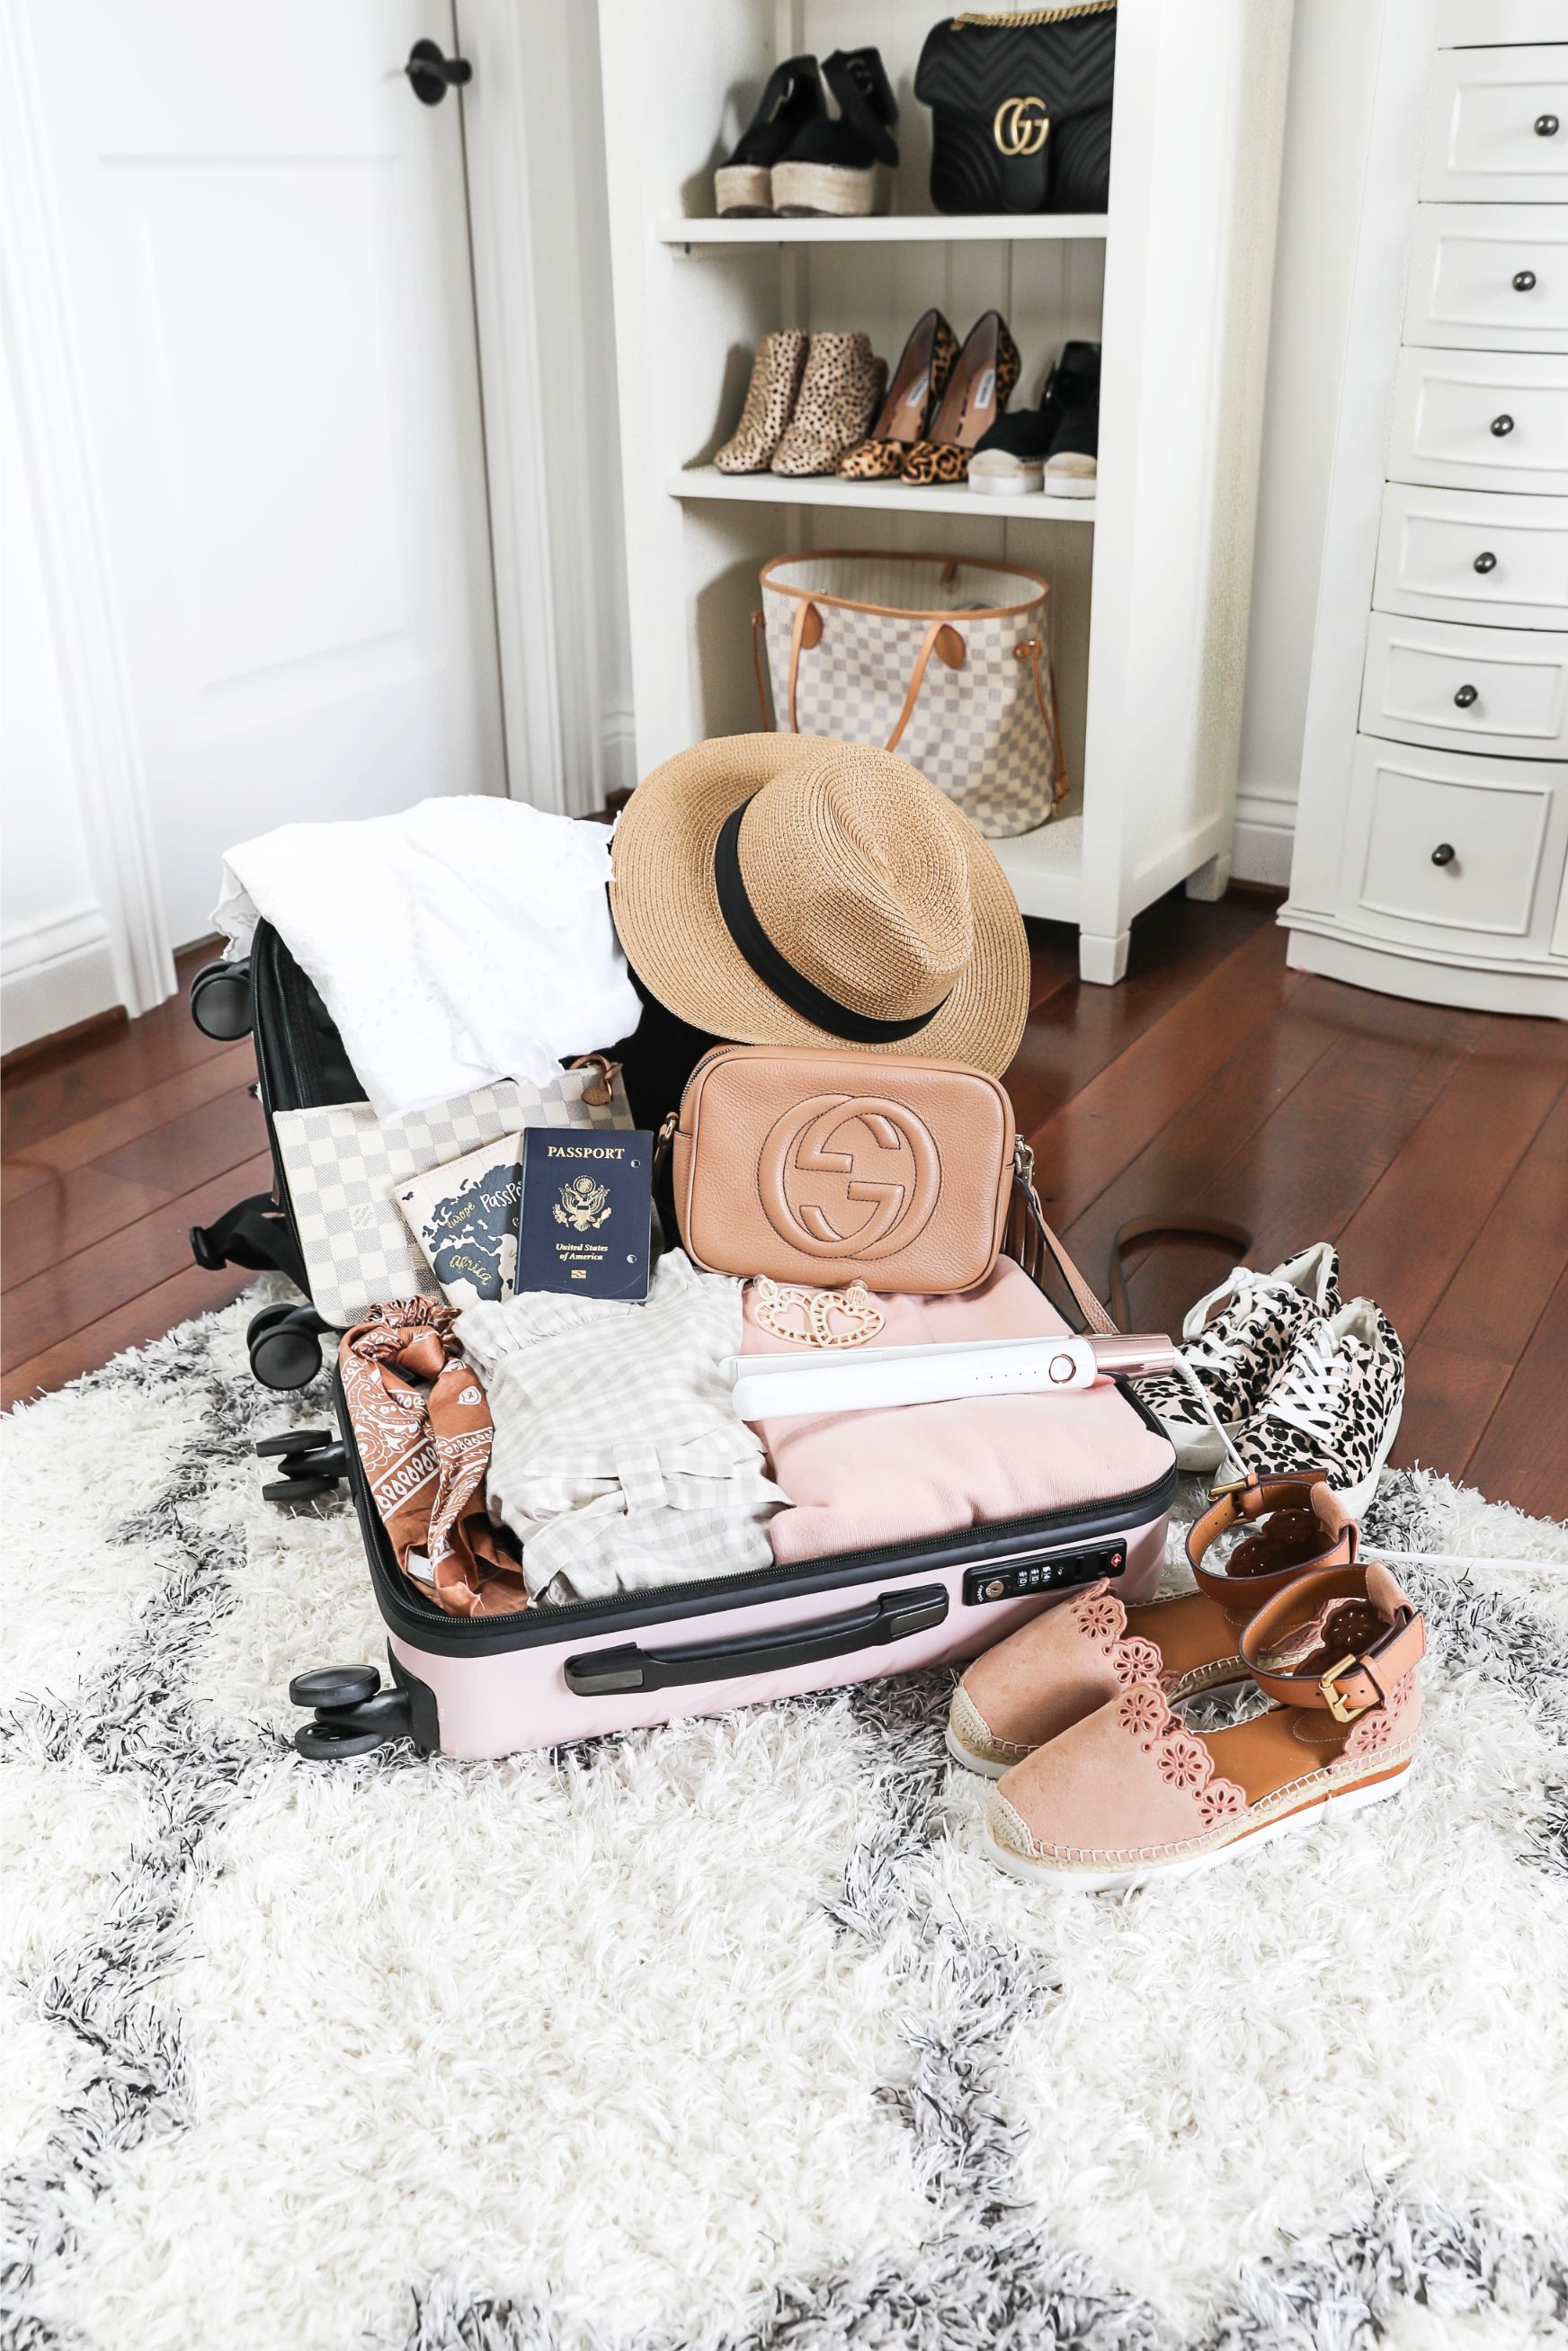 Weekend packing tips short vacation suitcase luggage lifestyle fashion blog daily dose of charm lauren lindmark